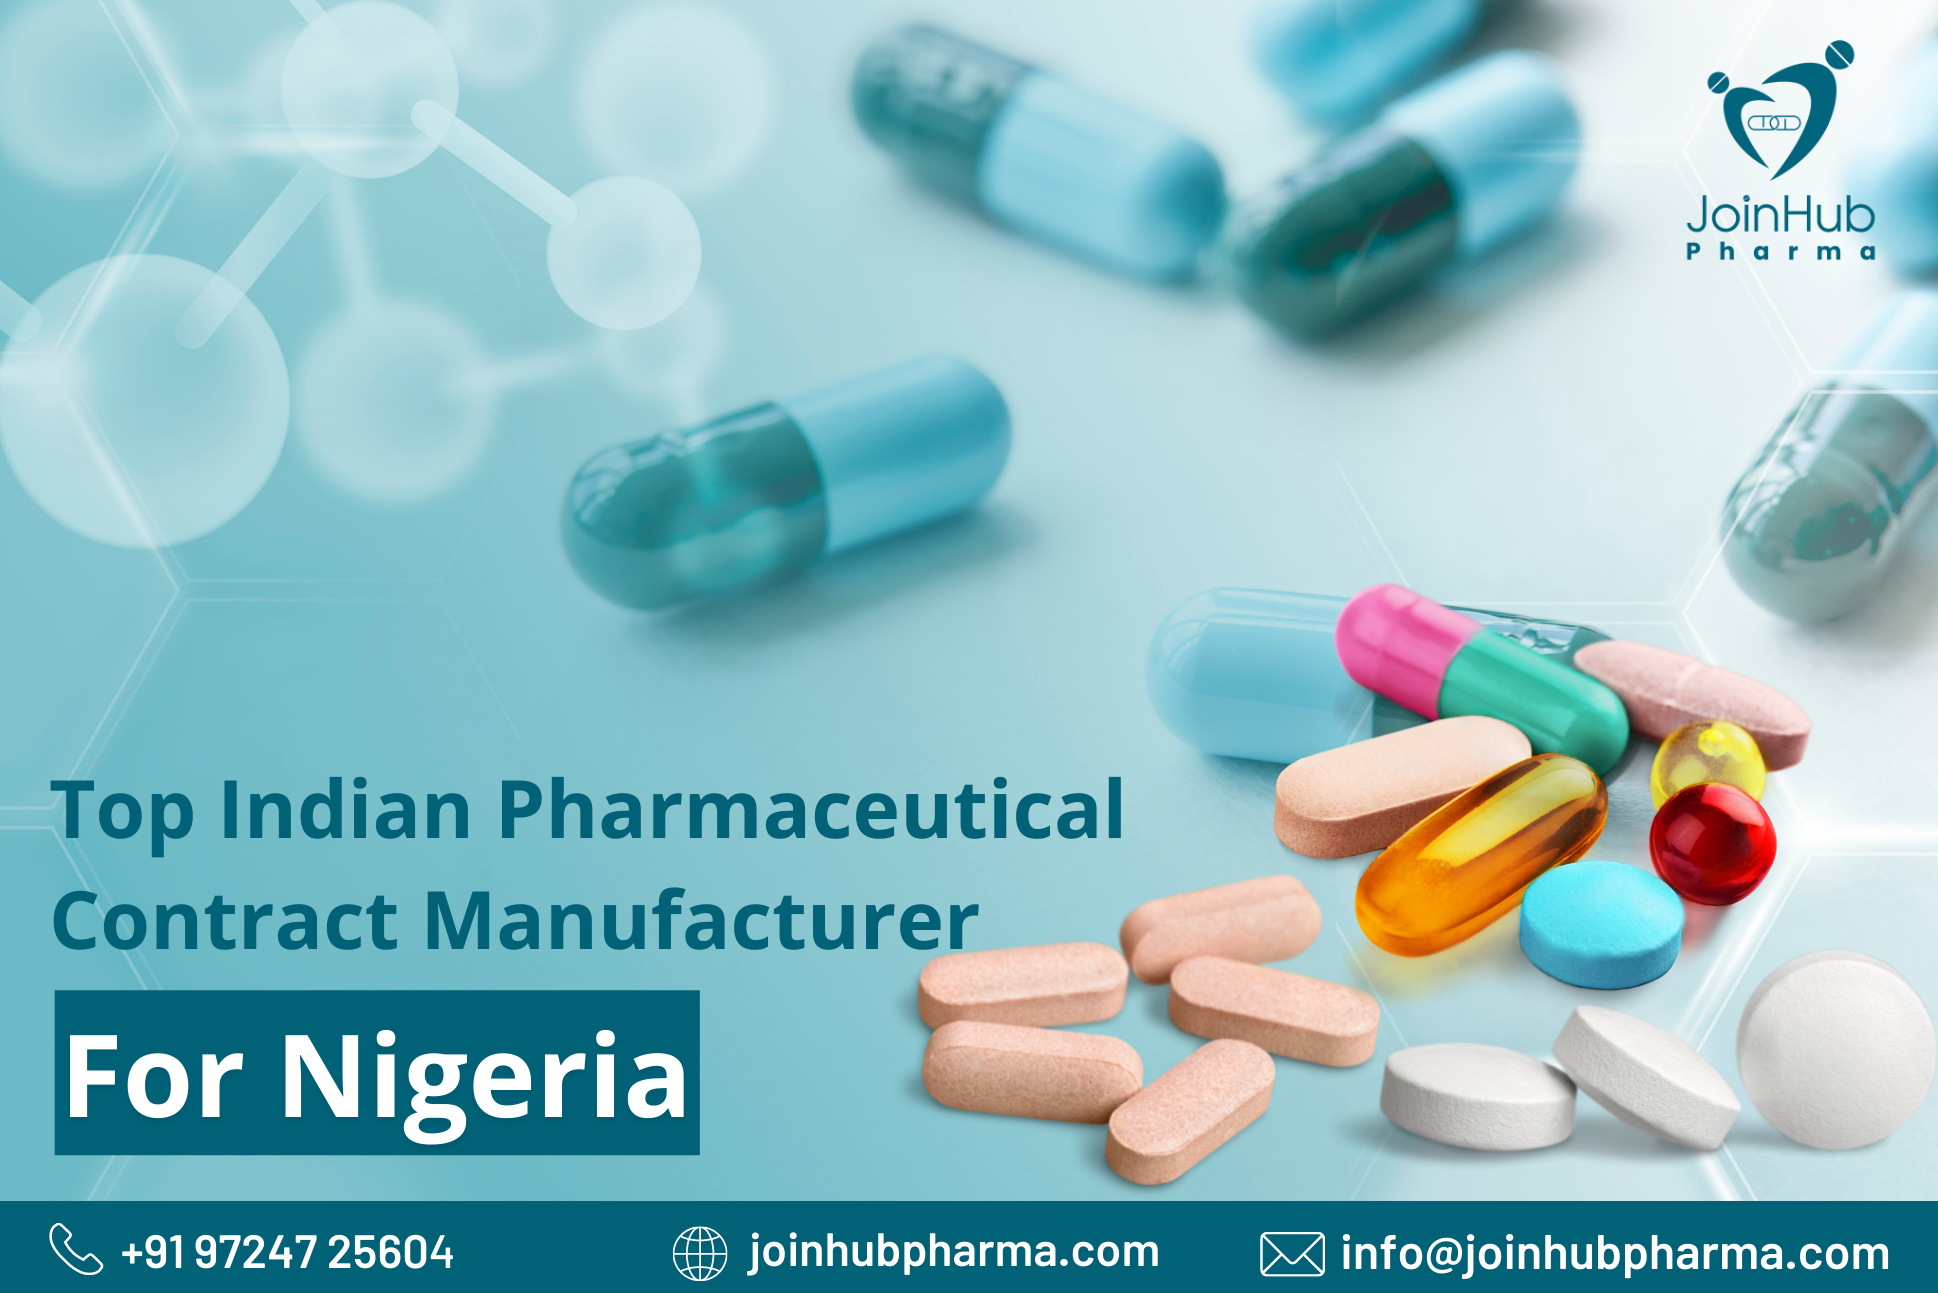 Top Indian Pharmaceutical Contract Manufacturer For Nigeria